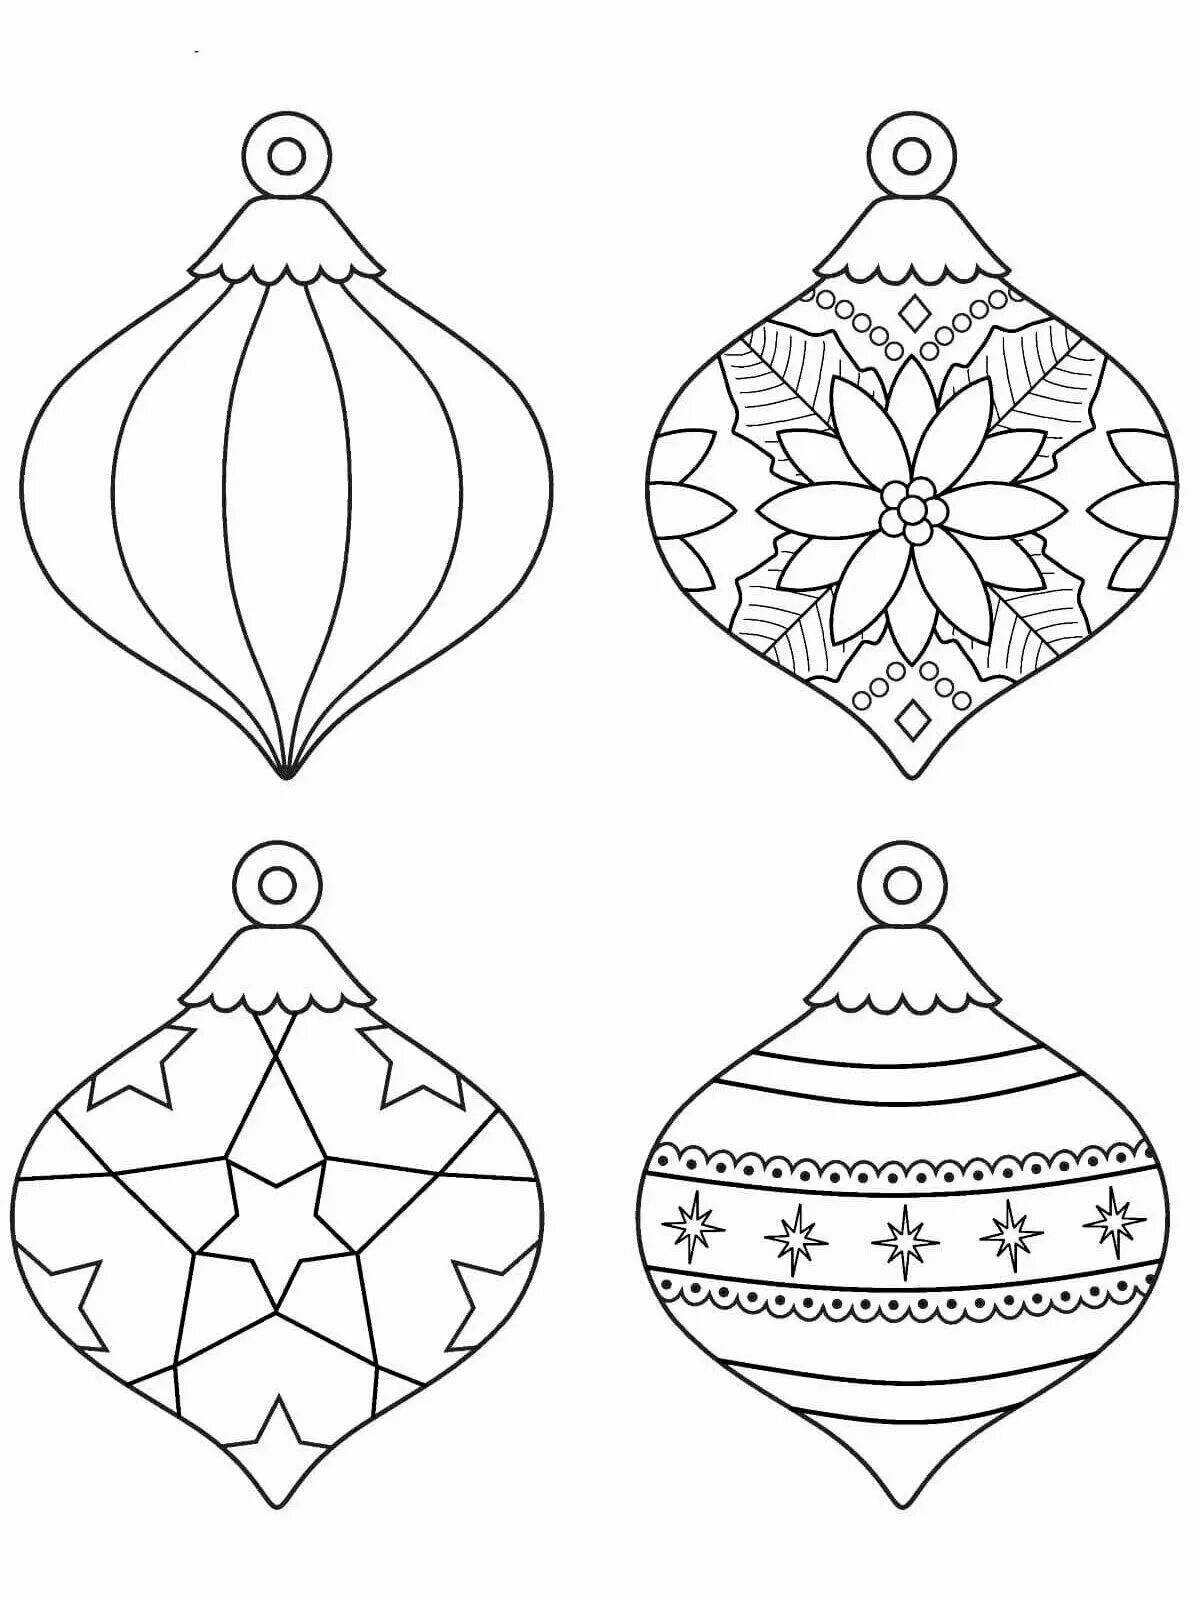 Coloring book shining Christmas toy ball